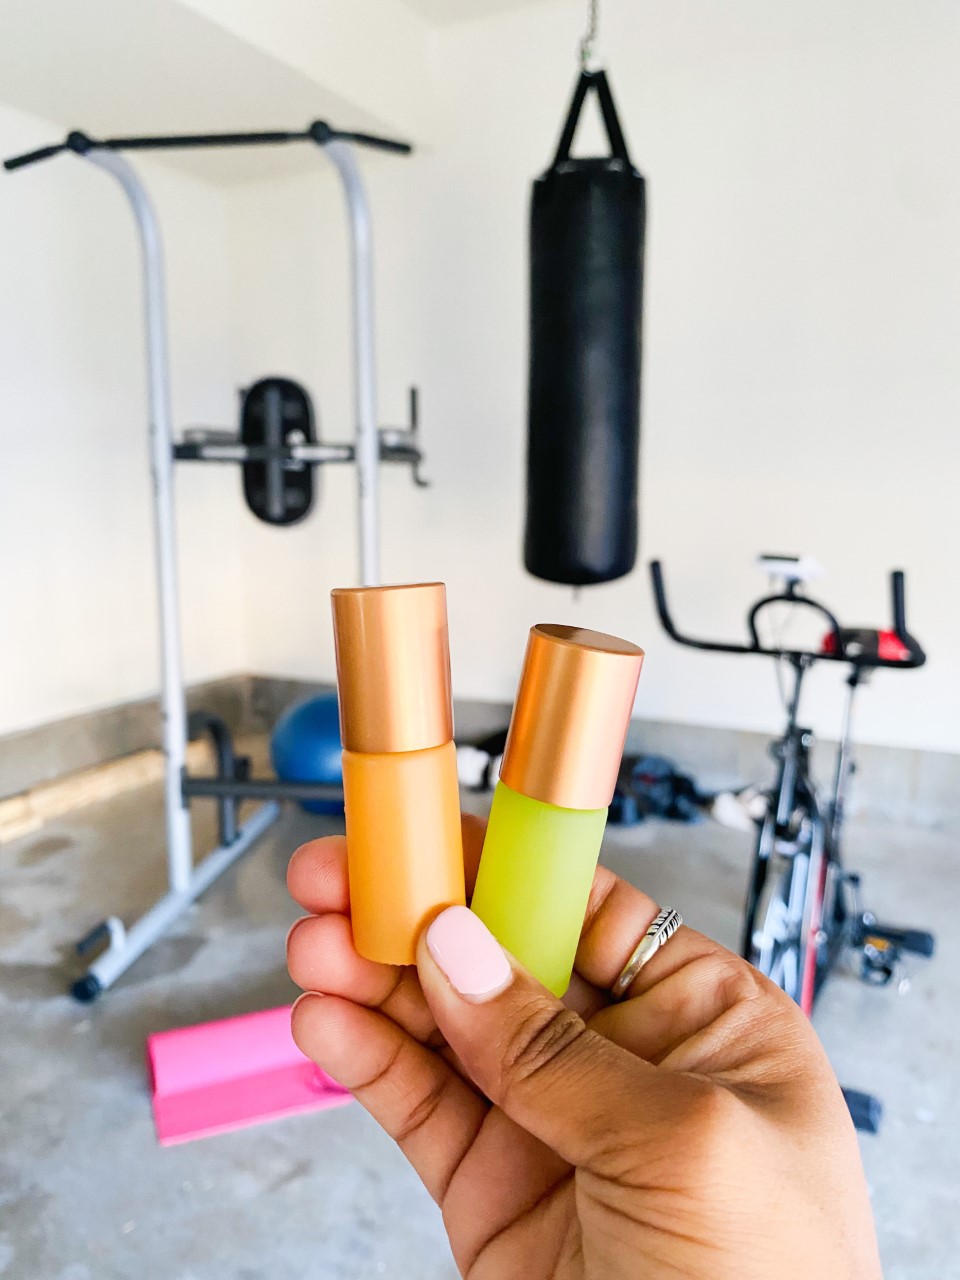 Anjali uses Young Living essential oils in Whimsy + Wellness roller bottles to support herself before, during and after her workout routine